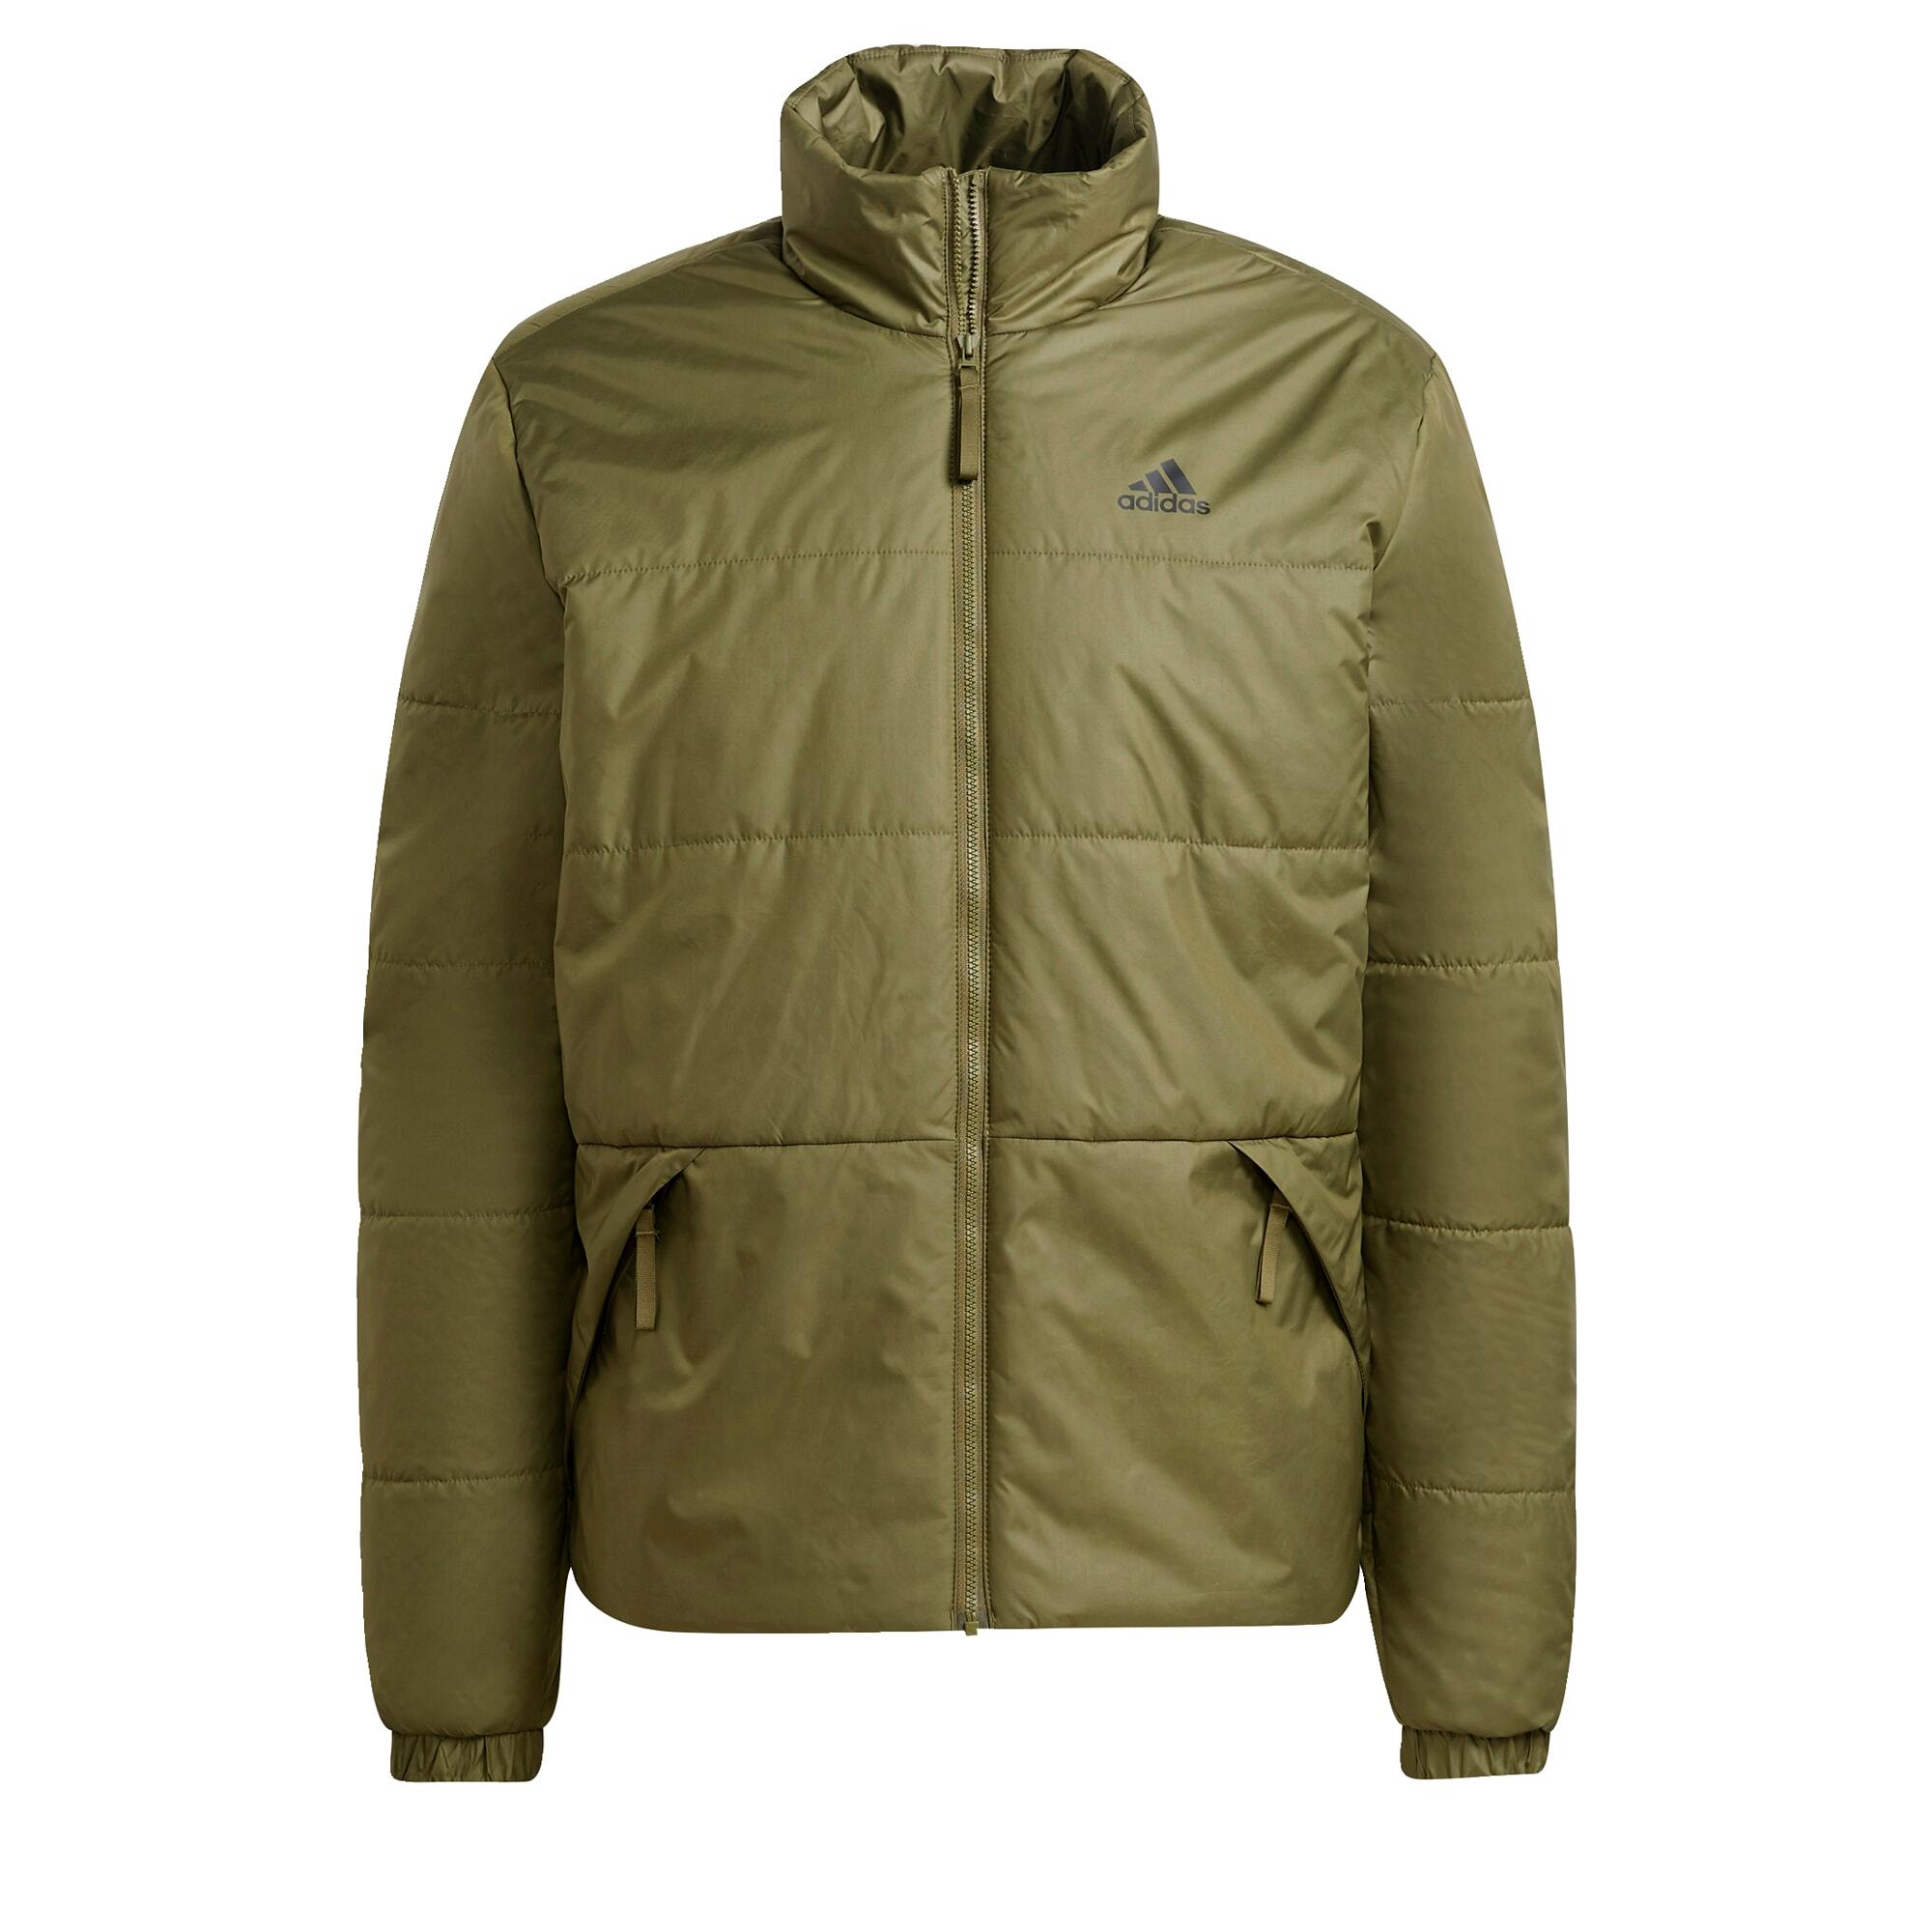 ADIDAS BSC 3-Stripes Insulated Winter Jacket